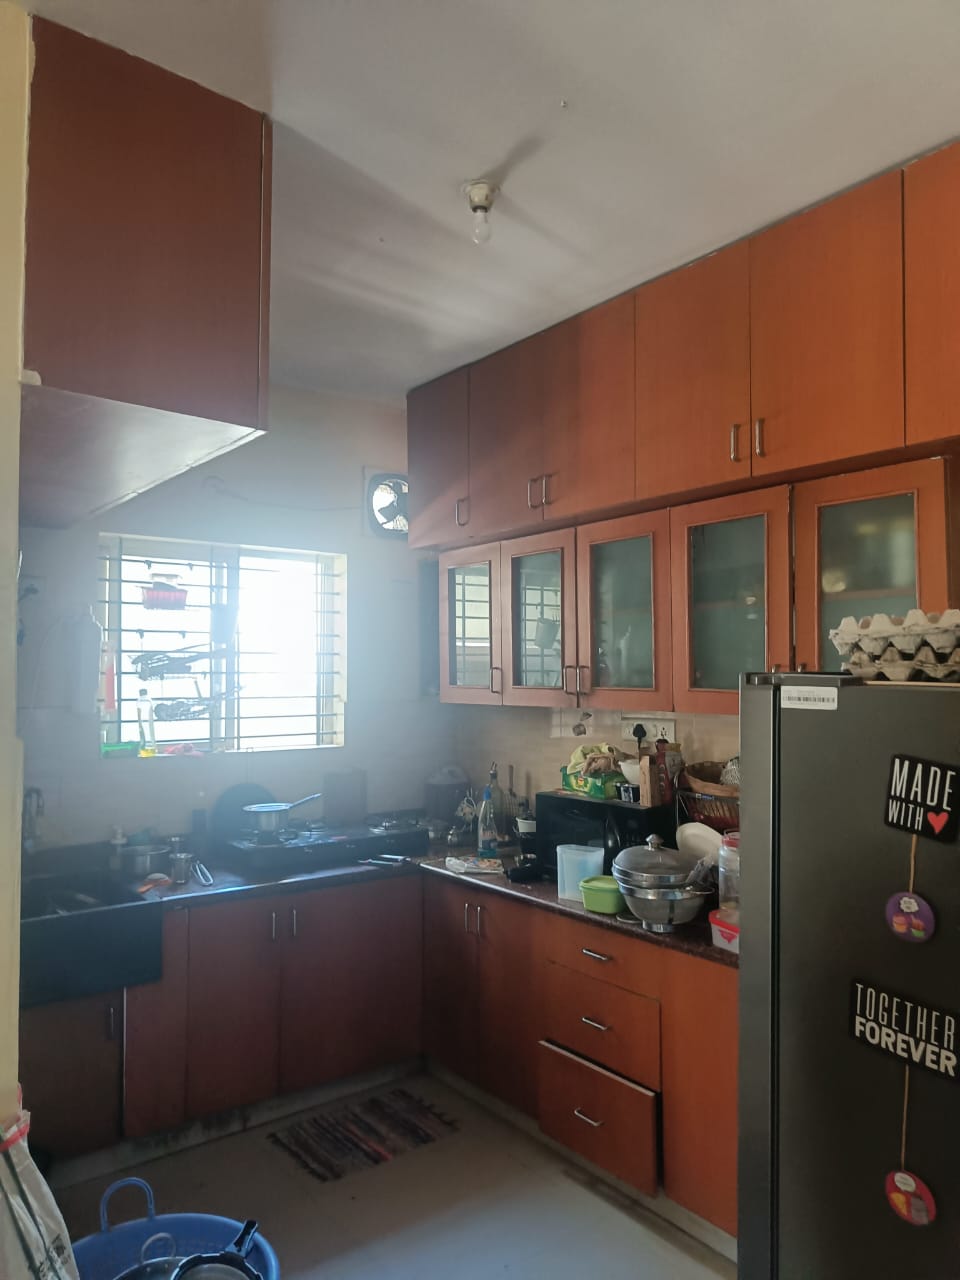 3 BHK Independent House for Lease Only at JAML2 - 2359 in Kodipalya